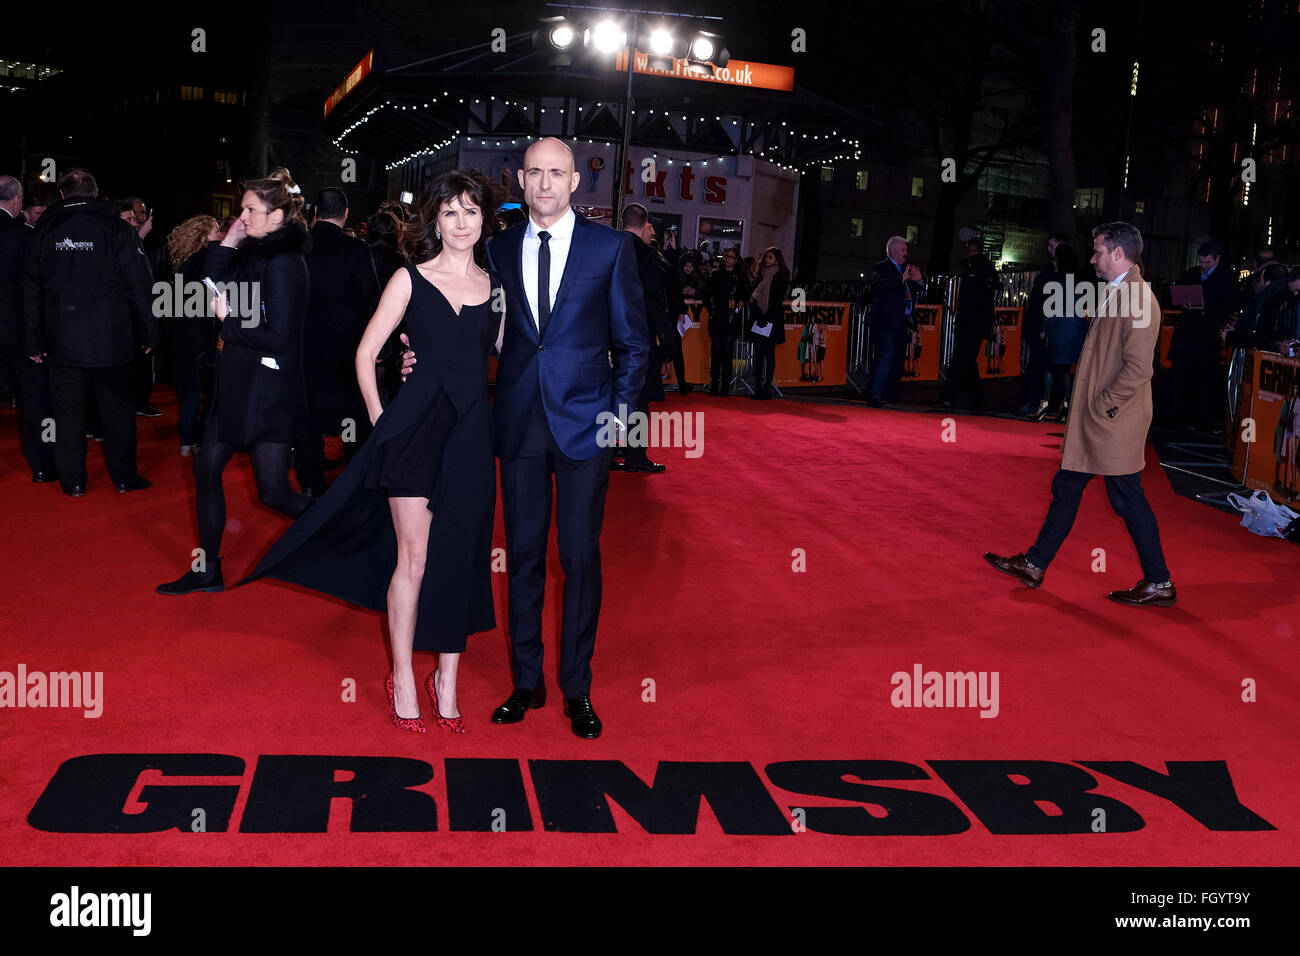 The World Premiere of Grimsby on 22/02/2016 at ODEON Leicester Square, London. Pictured: Liza Marshall, Mark Strong. Picture by Julie Edwards/Alamy Live News Stock Photo